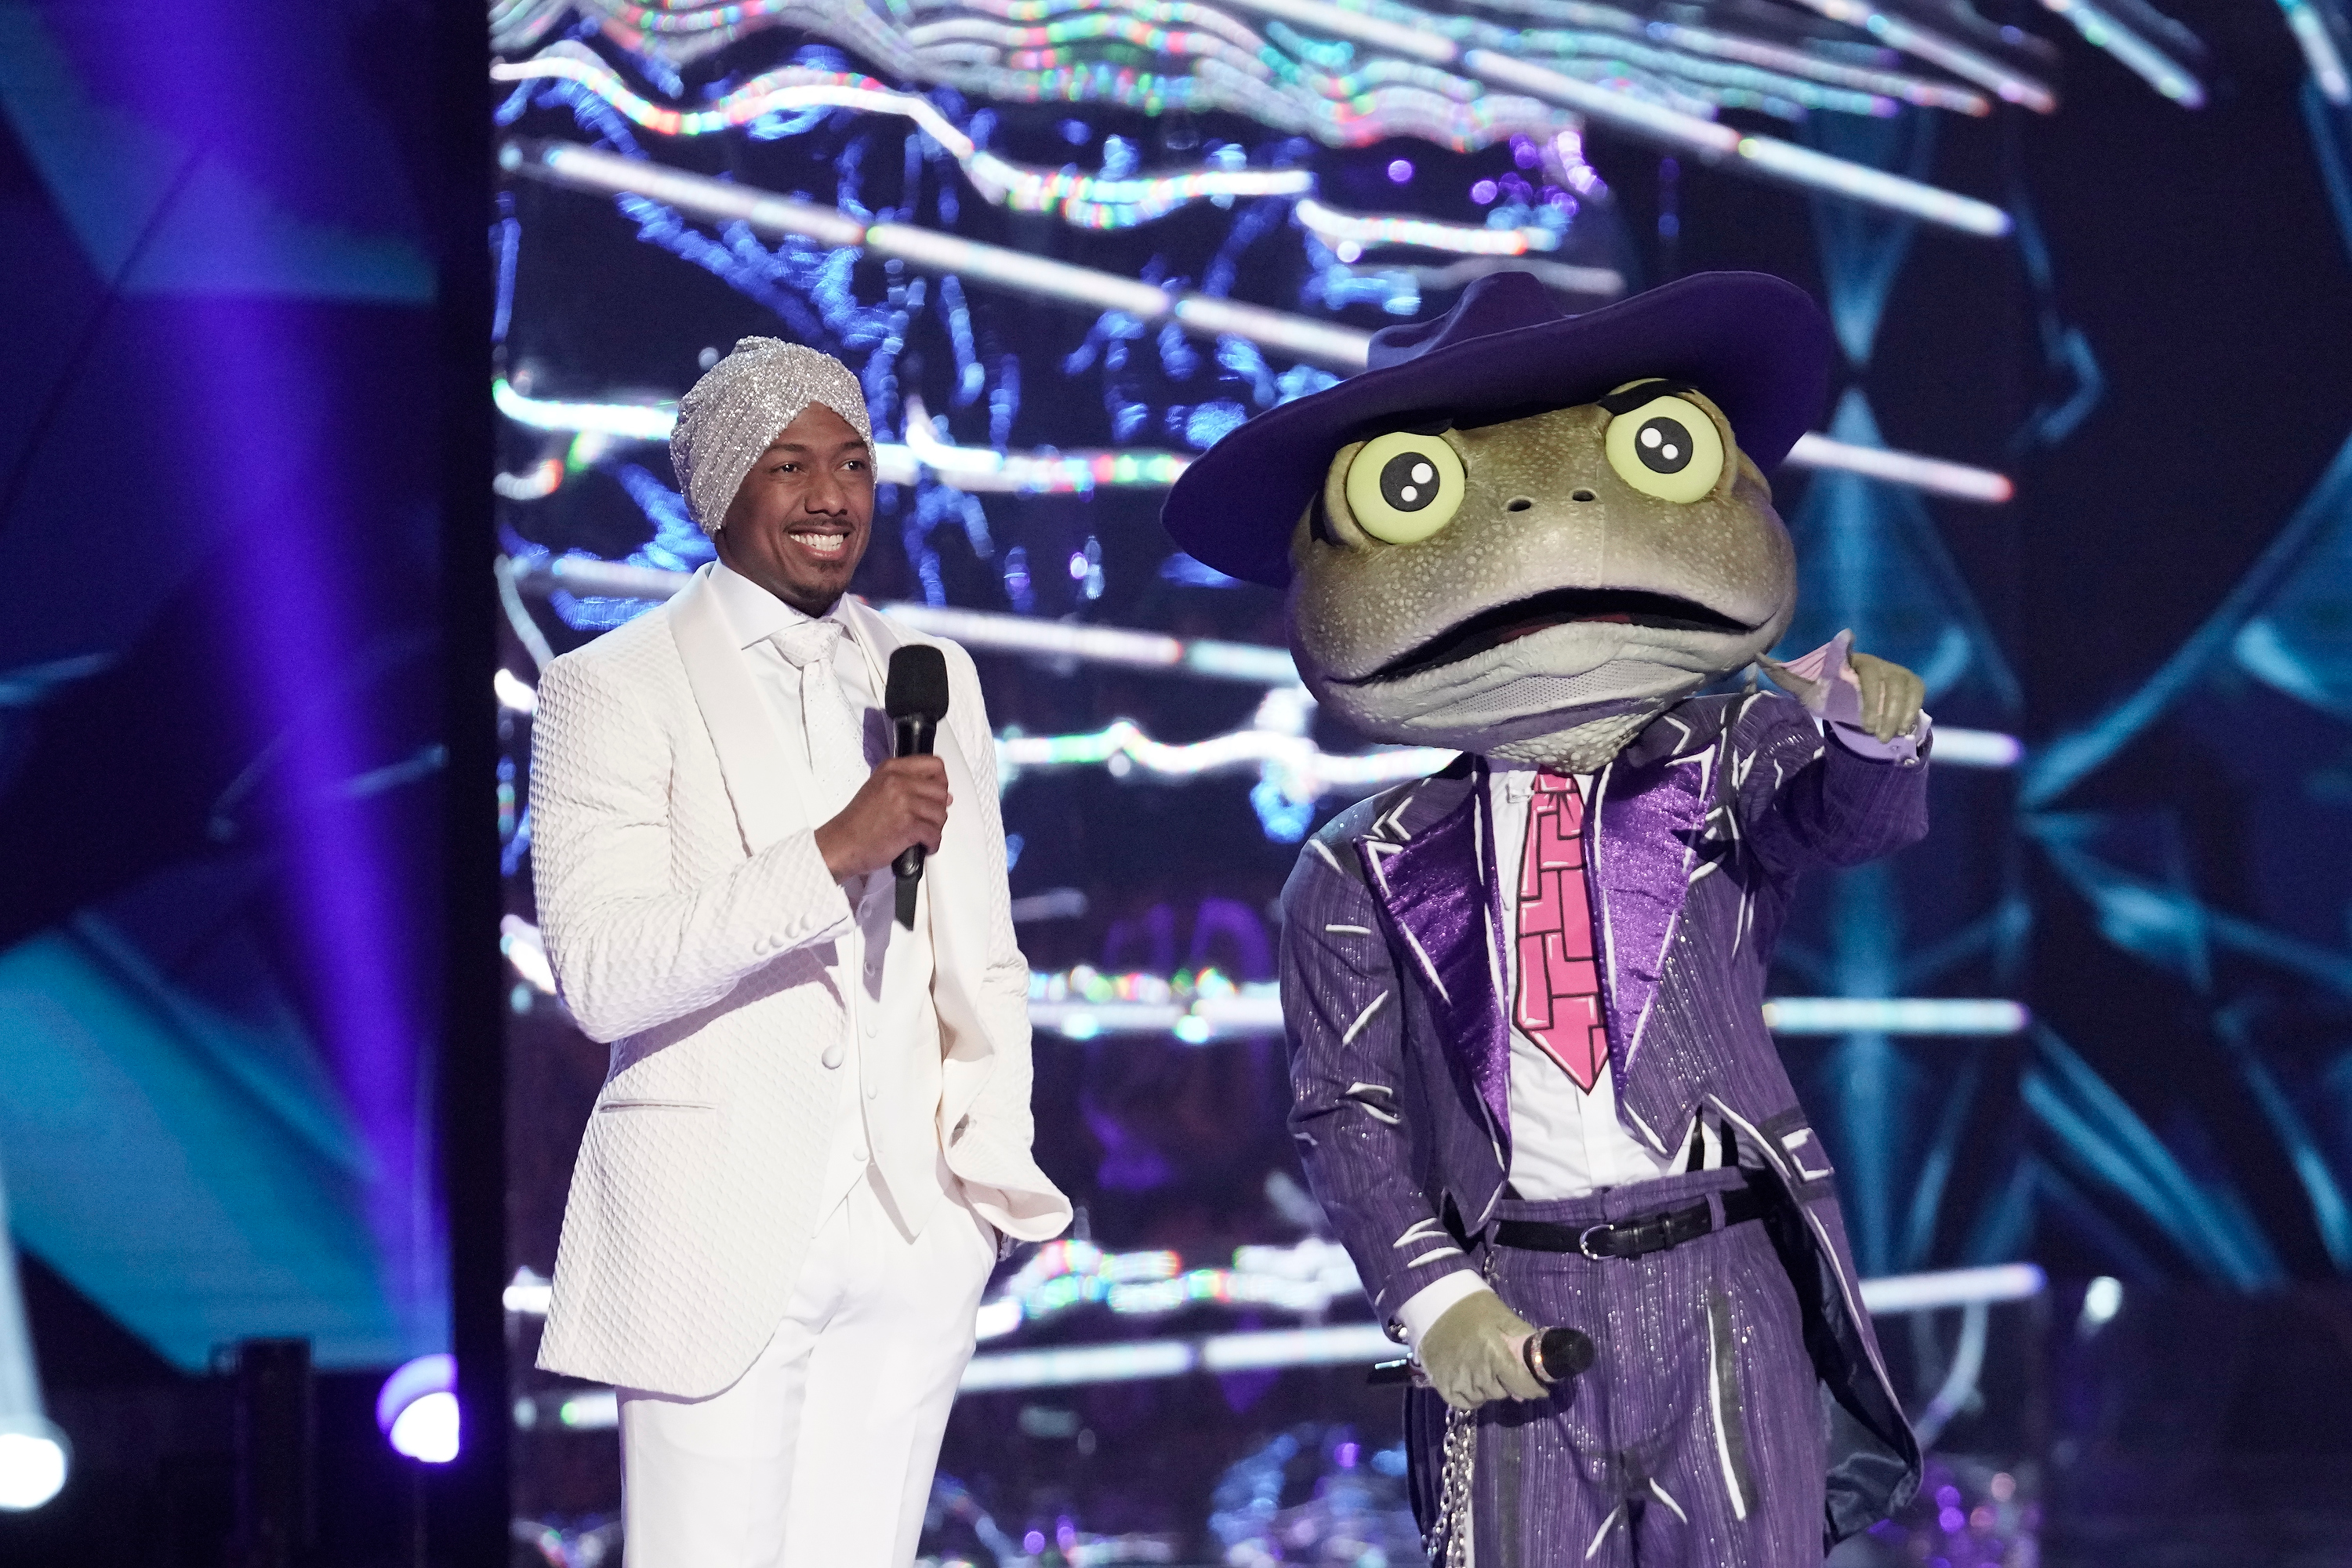 Nick Cannon on Fox's TV show The Masked Singer